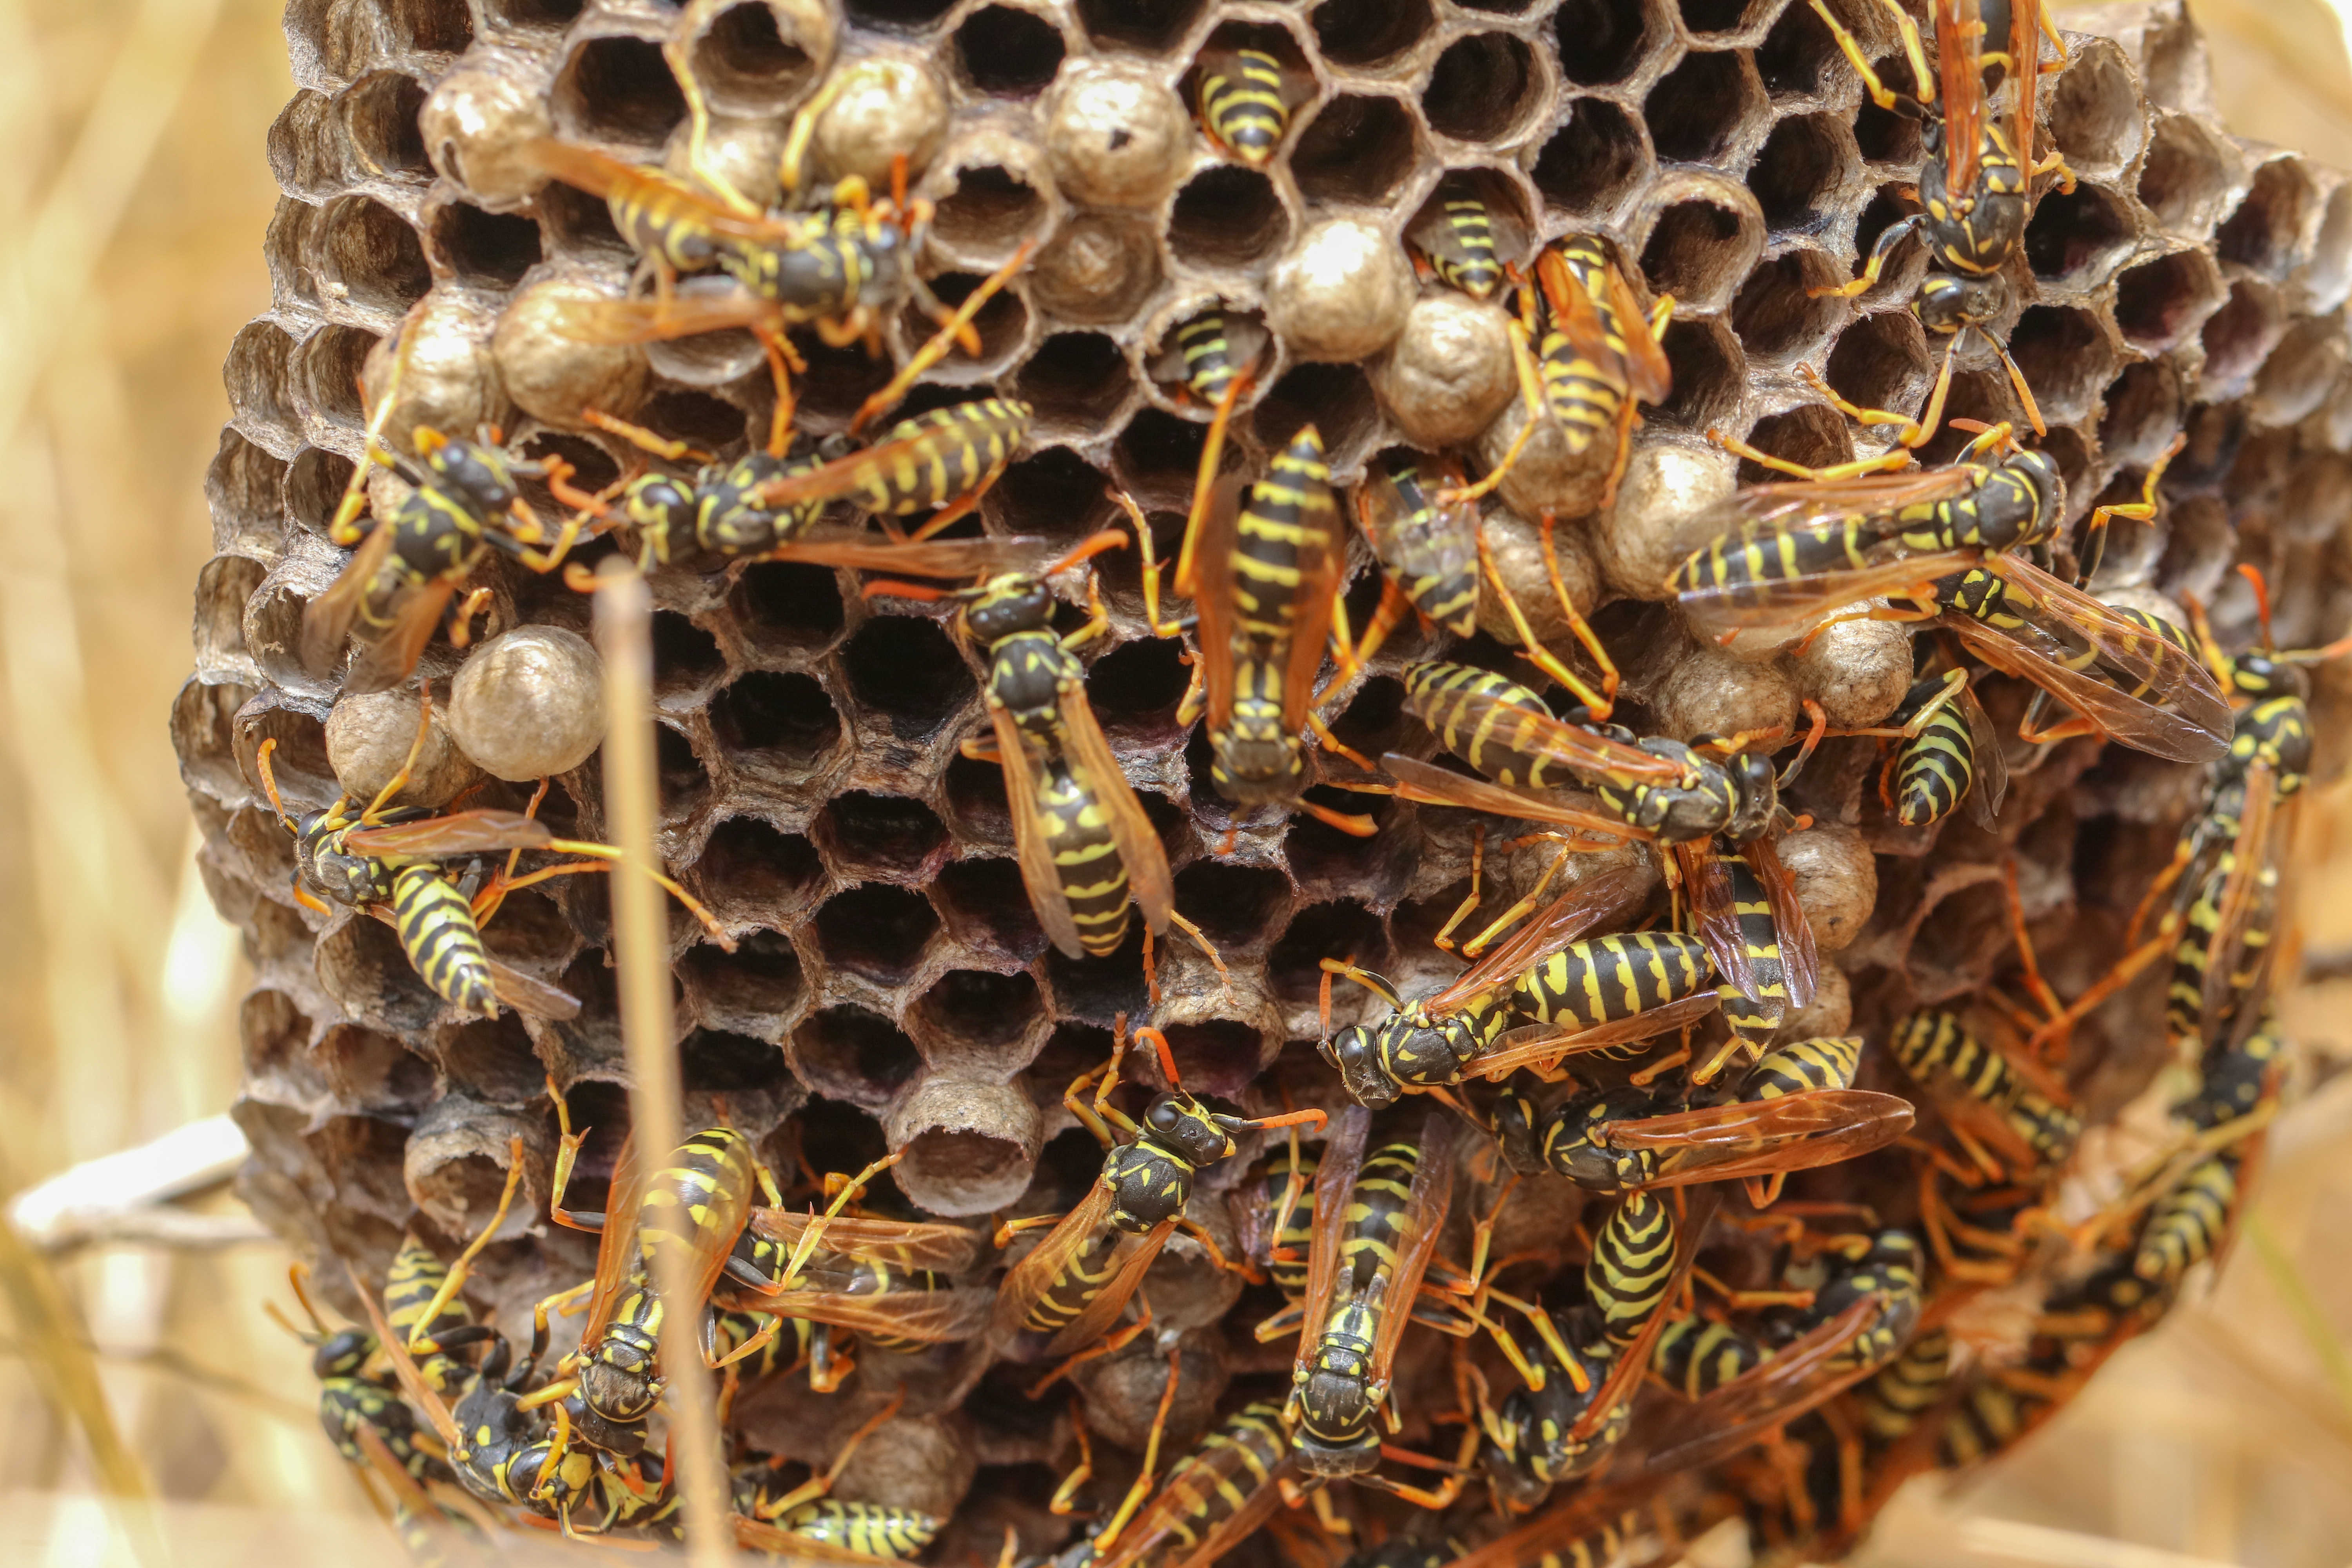 A hornets nests - learn how GGA Pest Management Waco can help with our hornet pest control services.